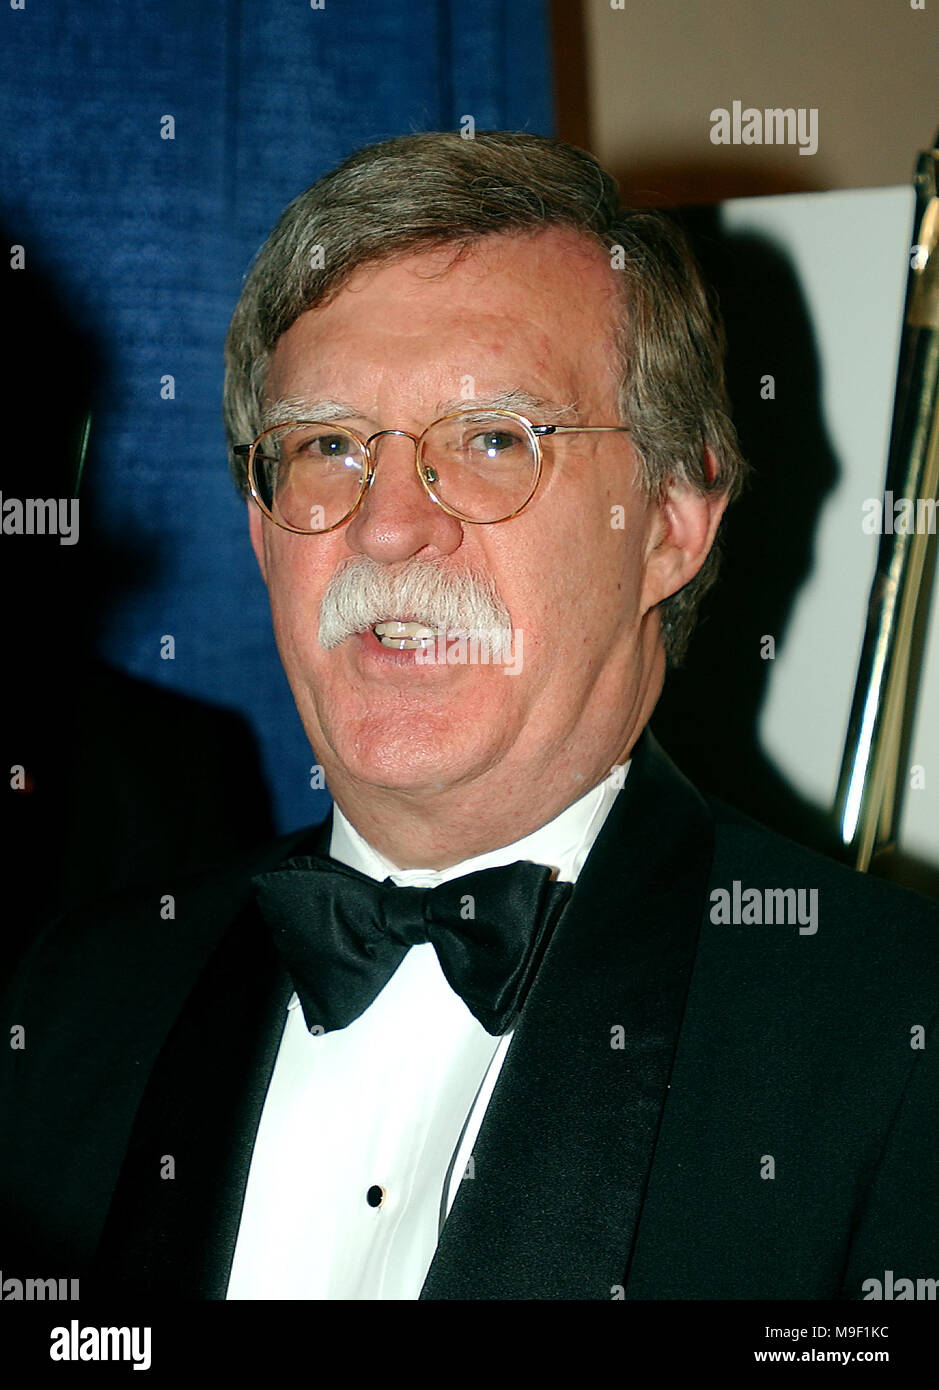 Washington, DC - April 29, 2006 -- United States Ambassador to the United Nations John Bolton at the Newsweek party at the Washington Hilton Hotel in Washington, DC prior to the annual White House Correspondents Association (WHCA) dinner. Credit: Ron Sachs/CNP (RESTRICTION: NO New York or New Jersey Newspapers or newspapers within a 75 mile radius of any part of New York, New York, including without limitation the New York Daily News, The New York Times, and Newsday.) - NO WIRE SERVICE - Photo: Ron Sachs/Consolidated News Photos/Ron Sachs - CNP Stock Photo